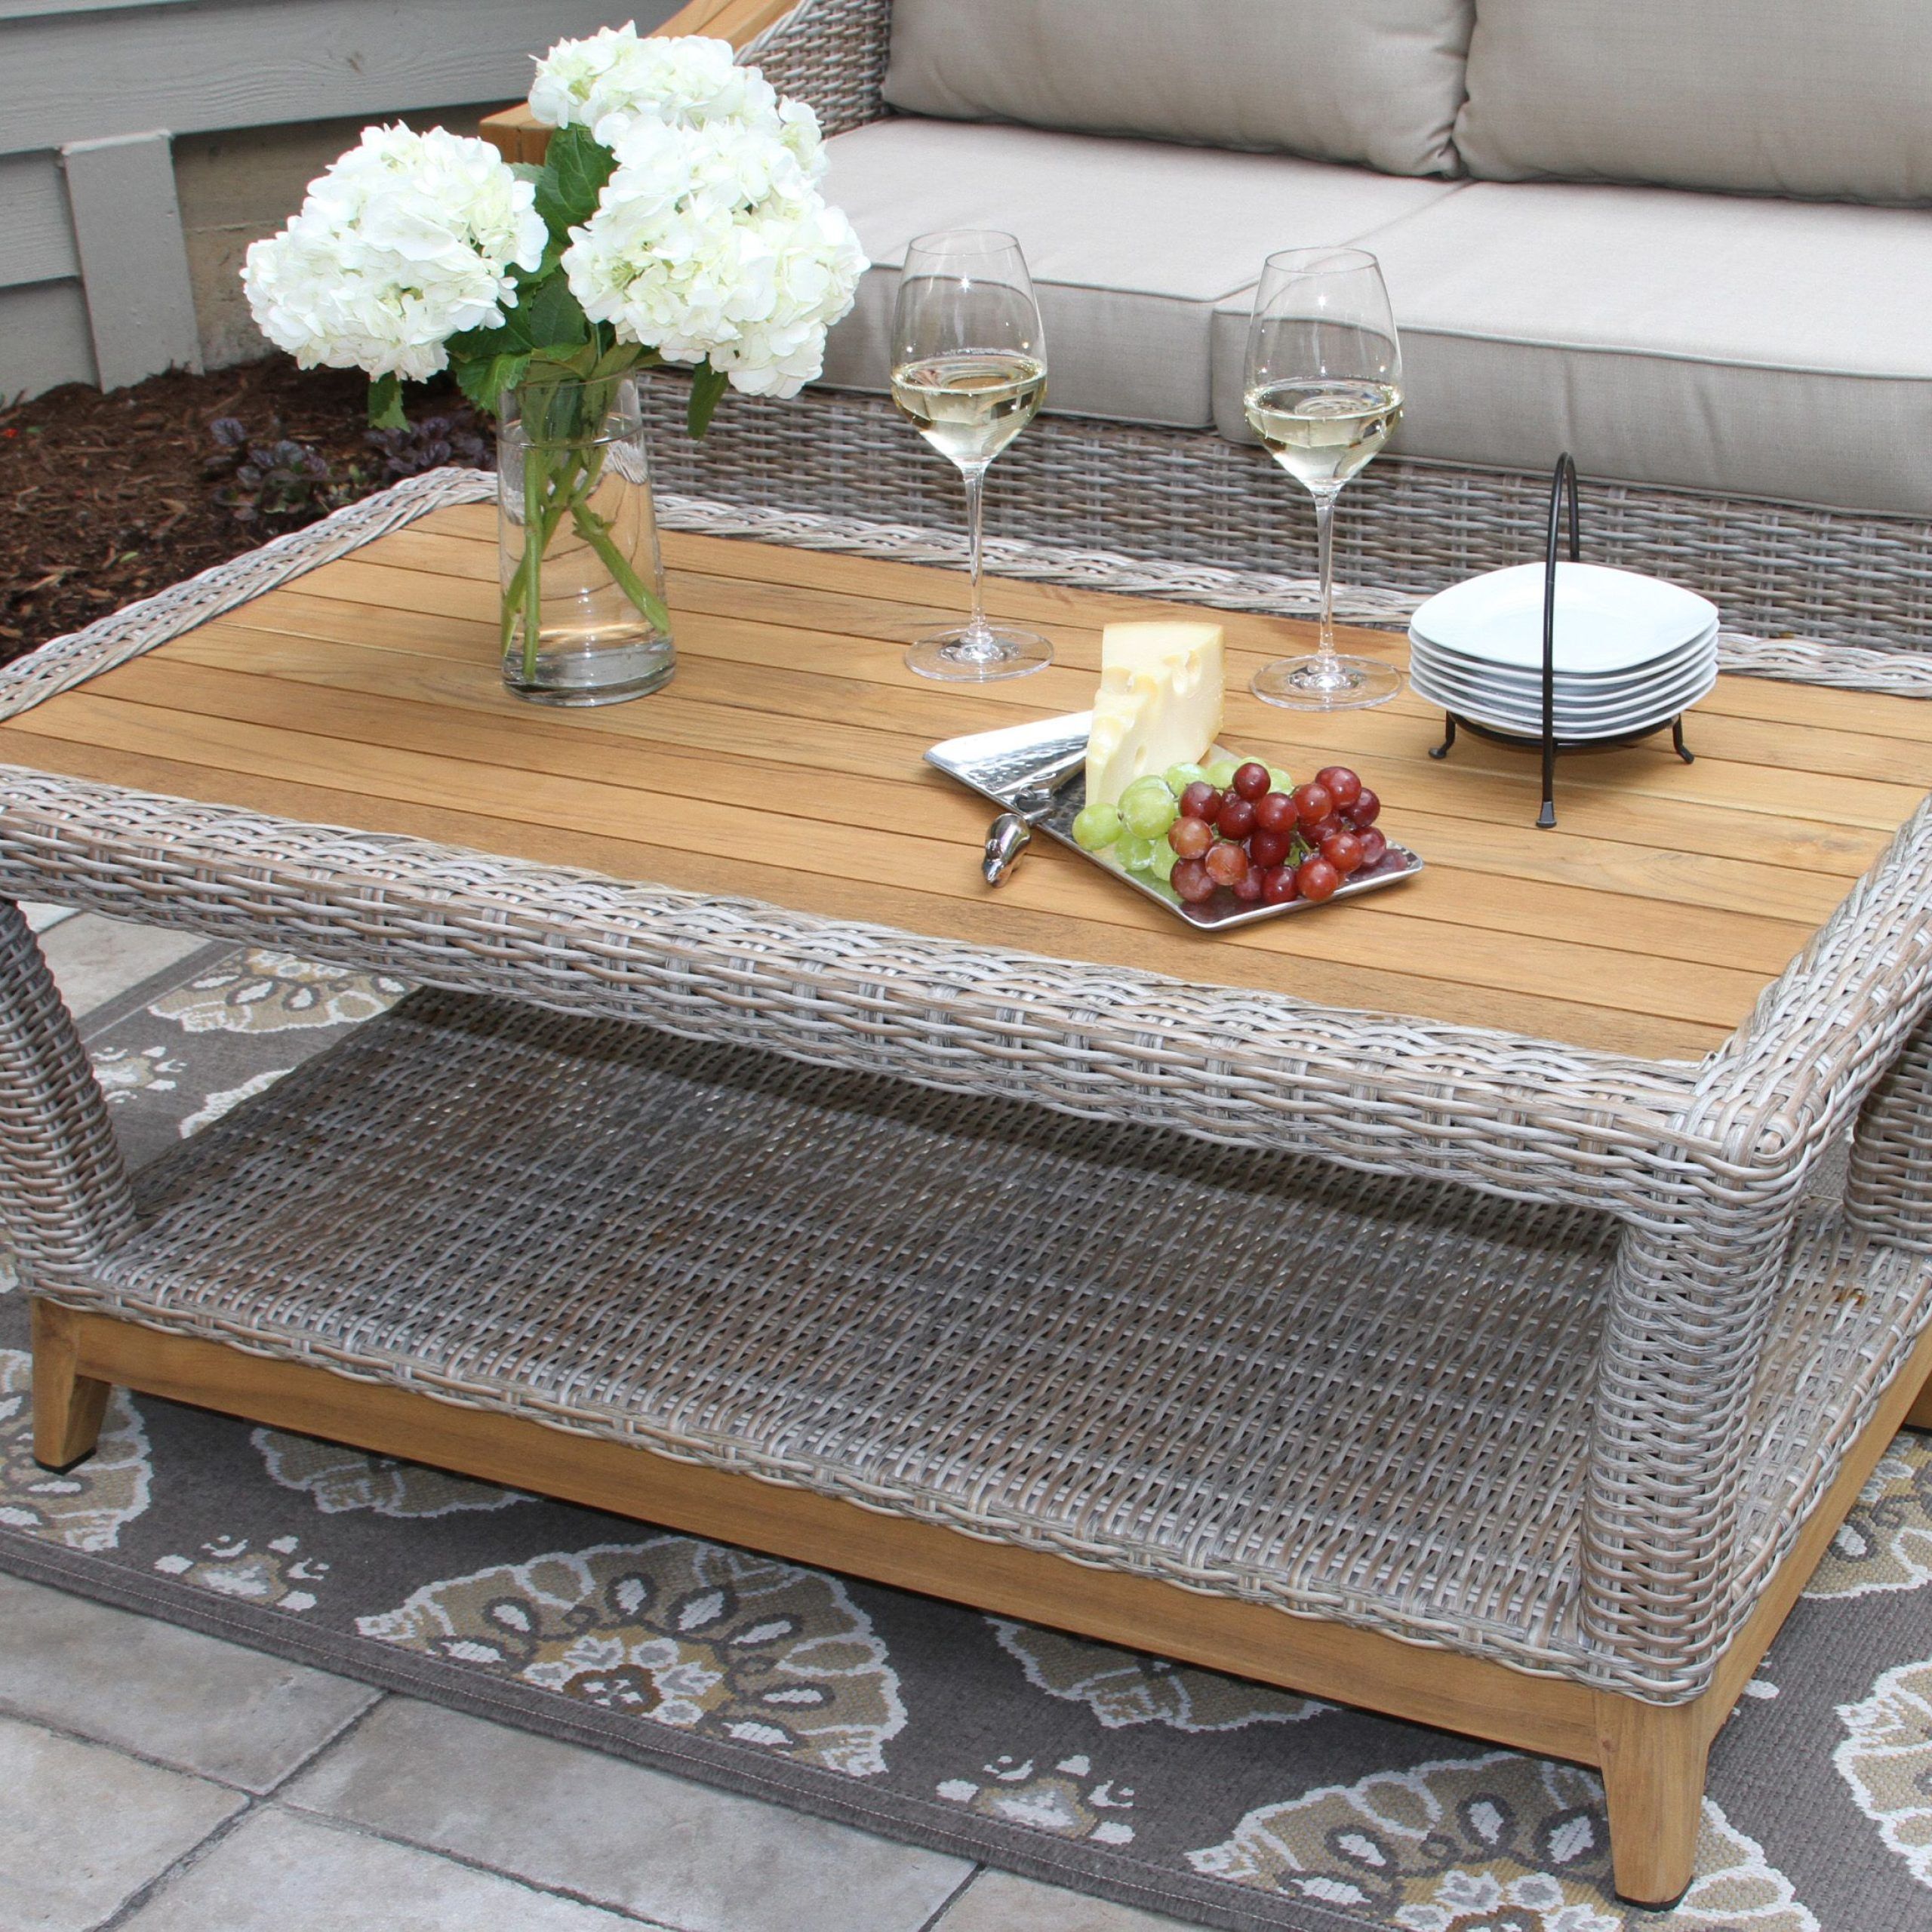 How To Decorate An Outdoor Coffee Table – Coffee Table Decor With Regard To Outdoor Half Round Coffee Tables (View 8 of 20)